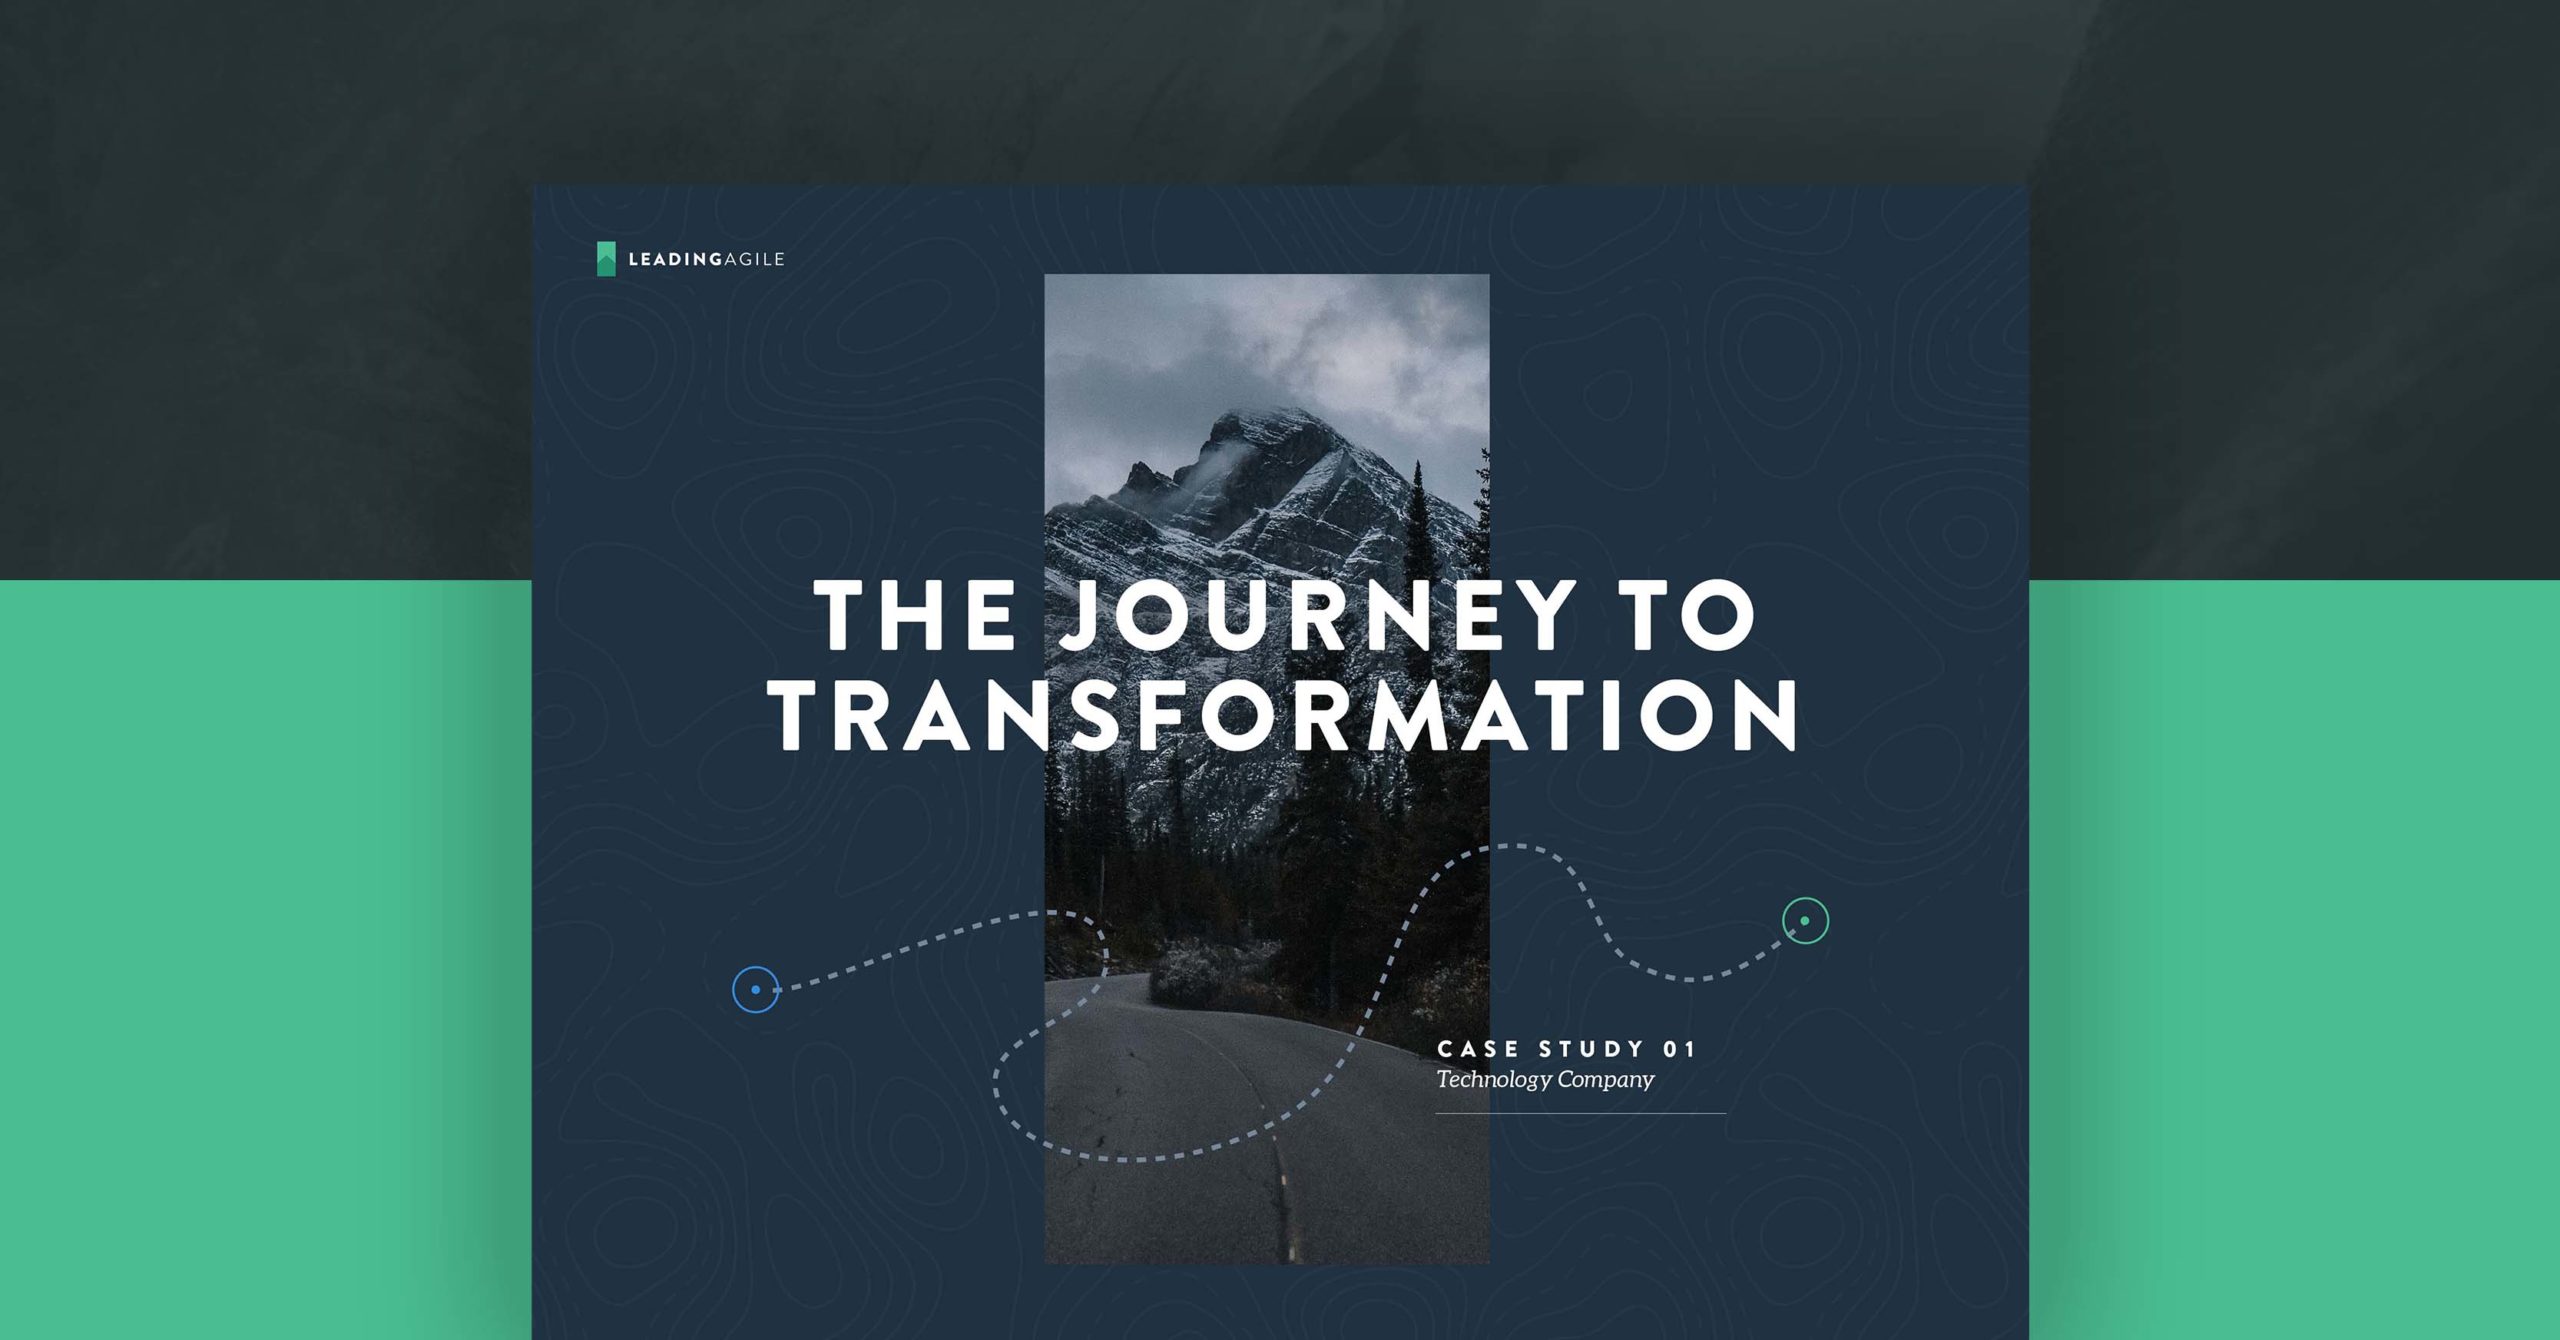 The Journey to Transformation